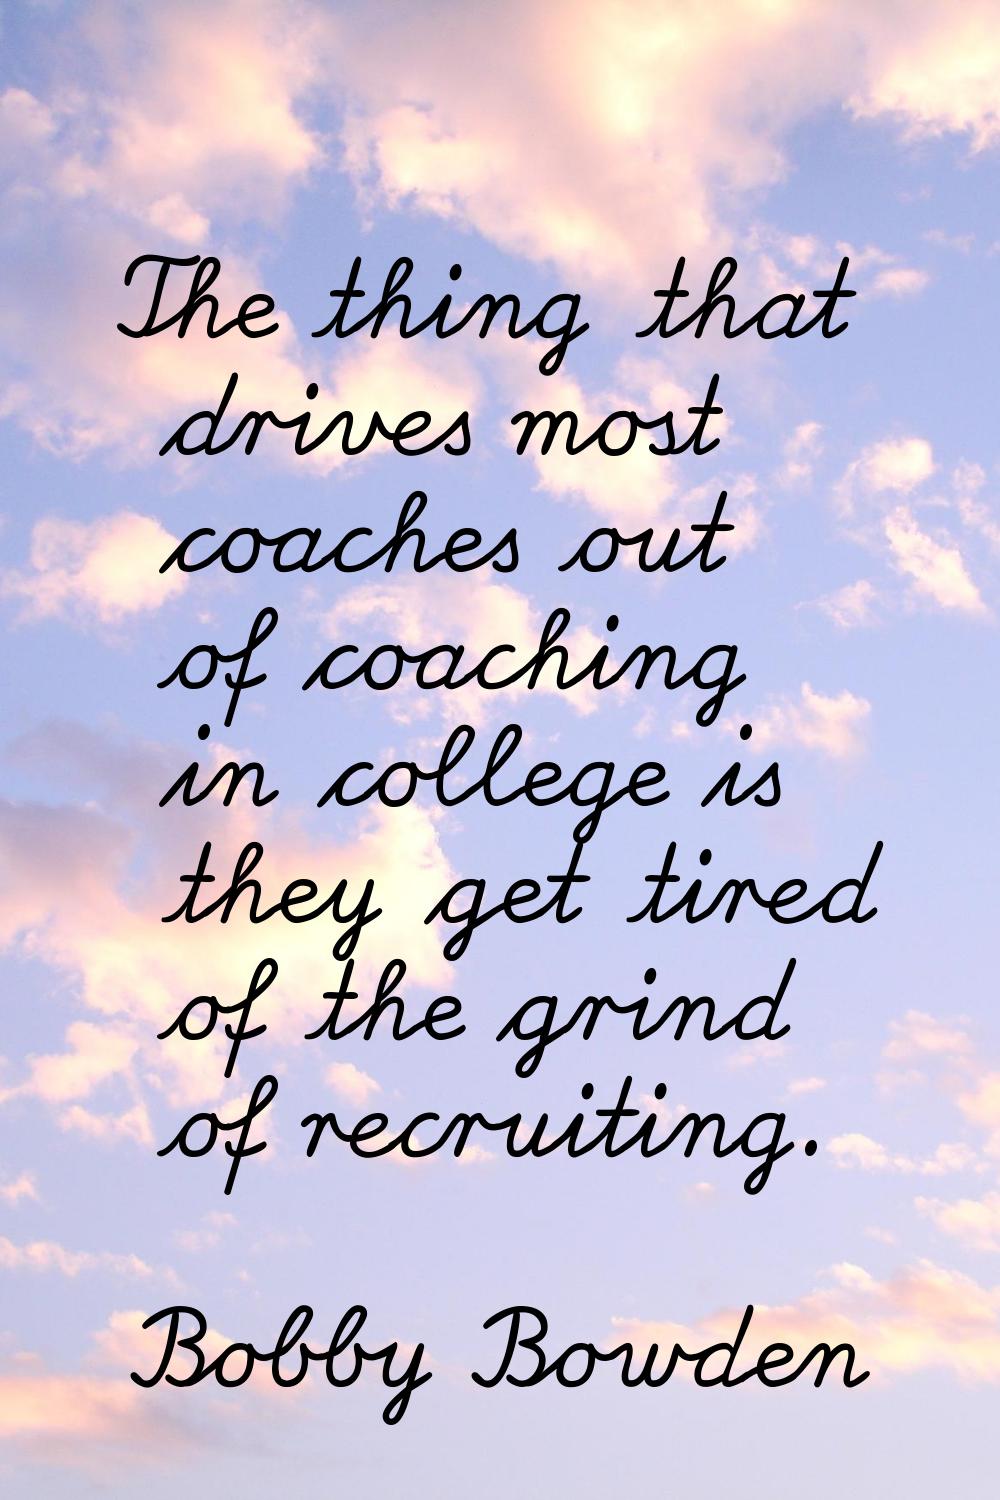 The thing that drives most coaches out of coaching in college is they get tired of the grind of rec